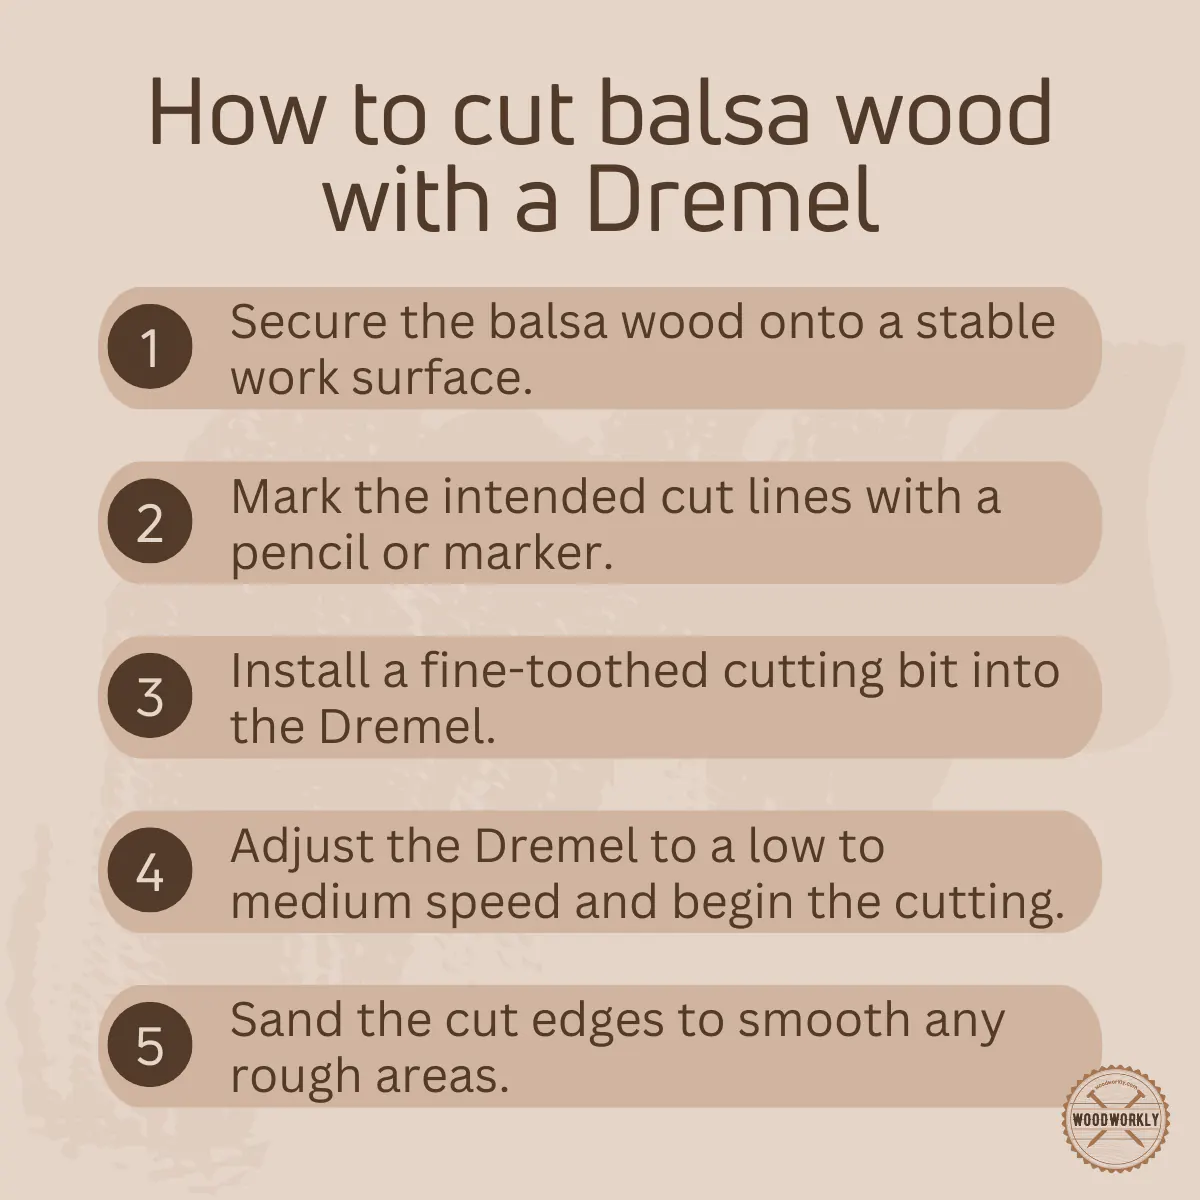 How to cut balsa wood with a Dremel